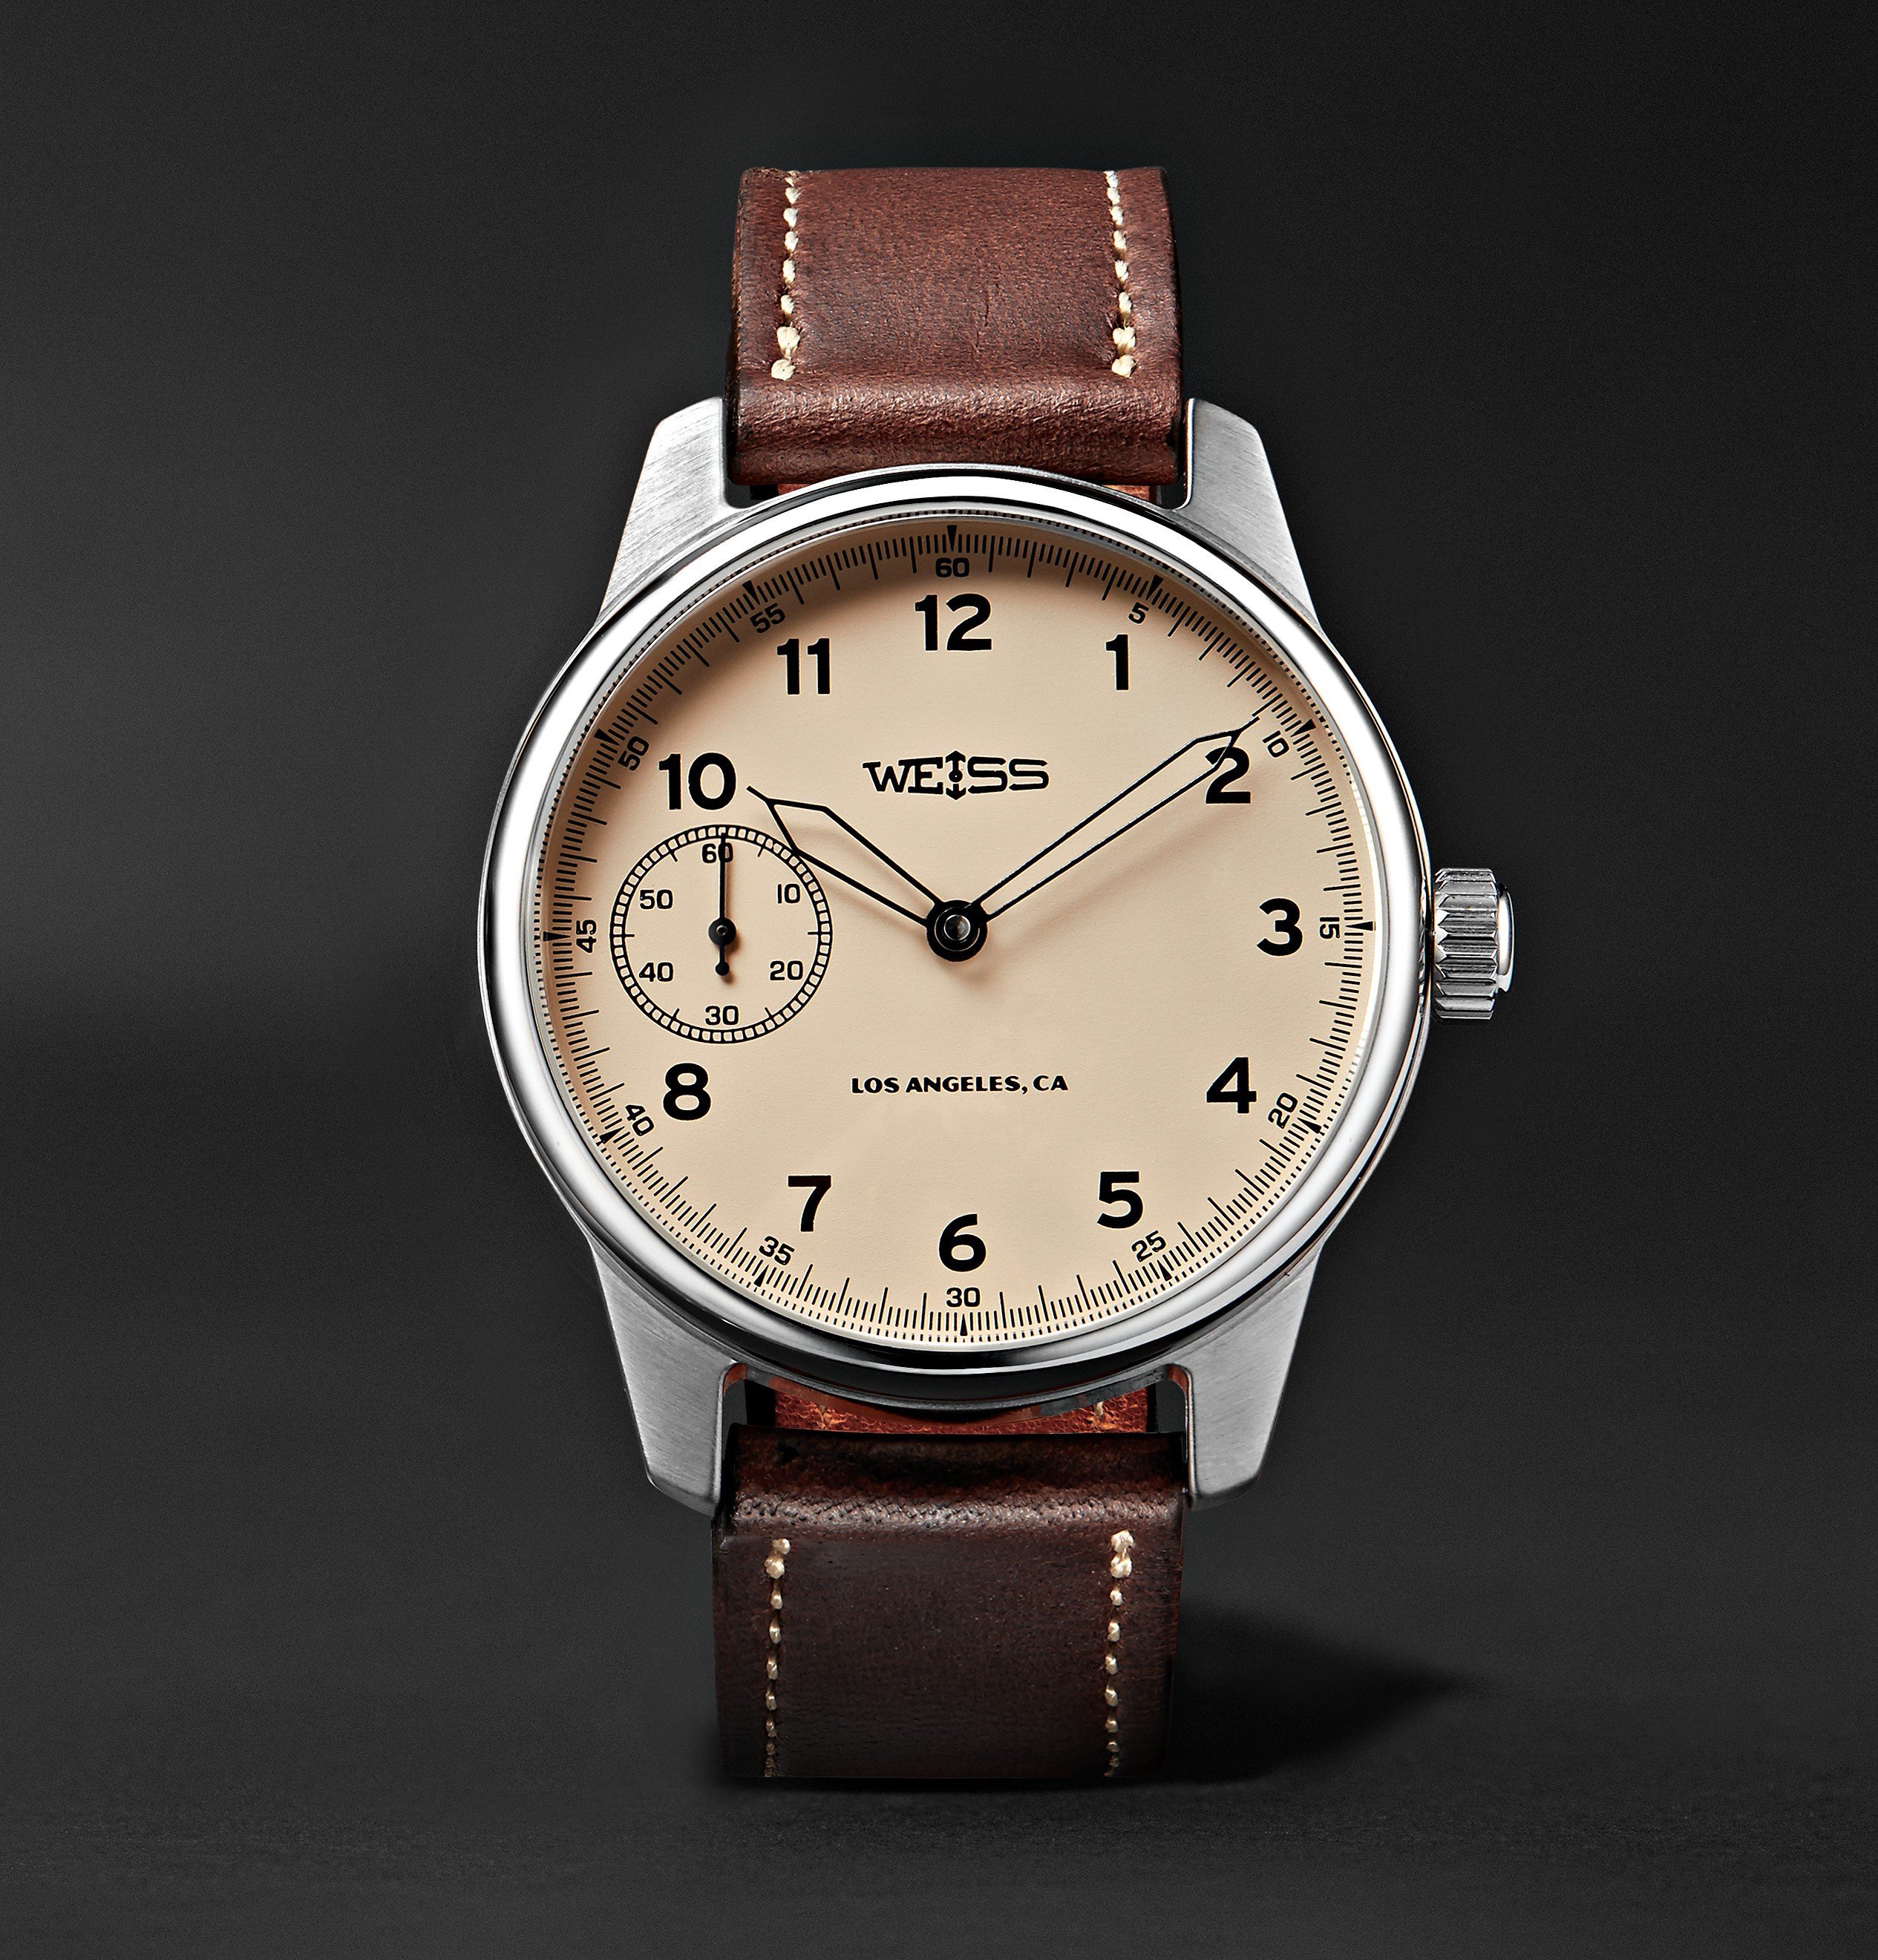 The Special Issue watch from Weiss, the brand dedicated to ‘restoring prestige to American watchmaking’.